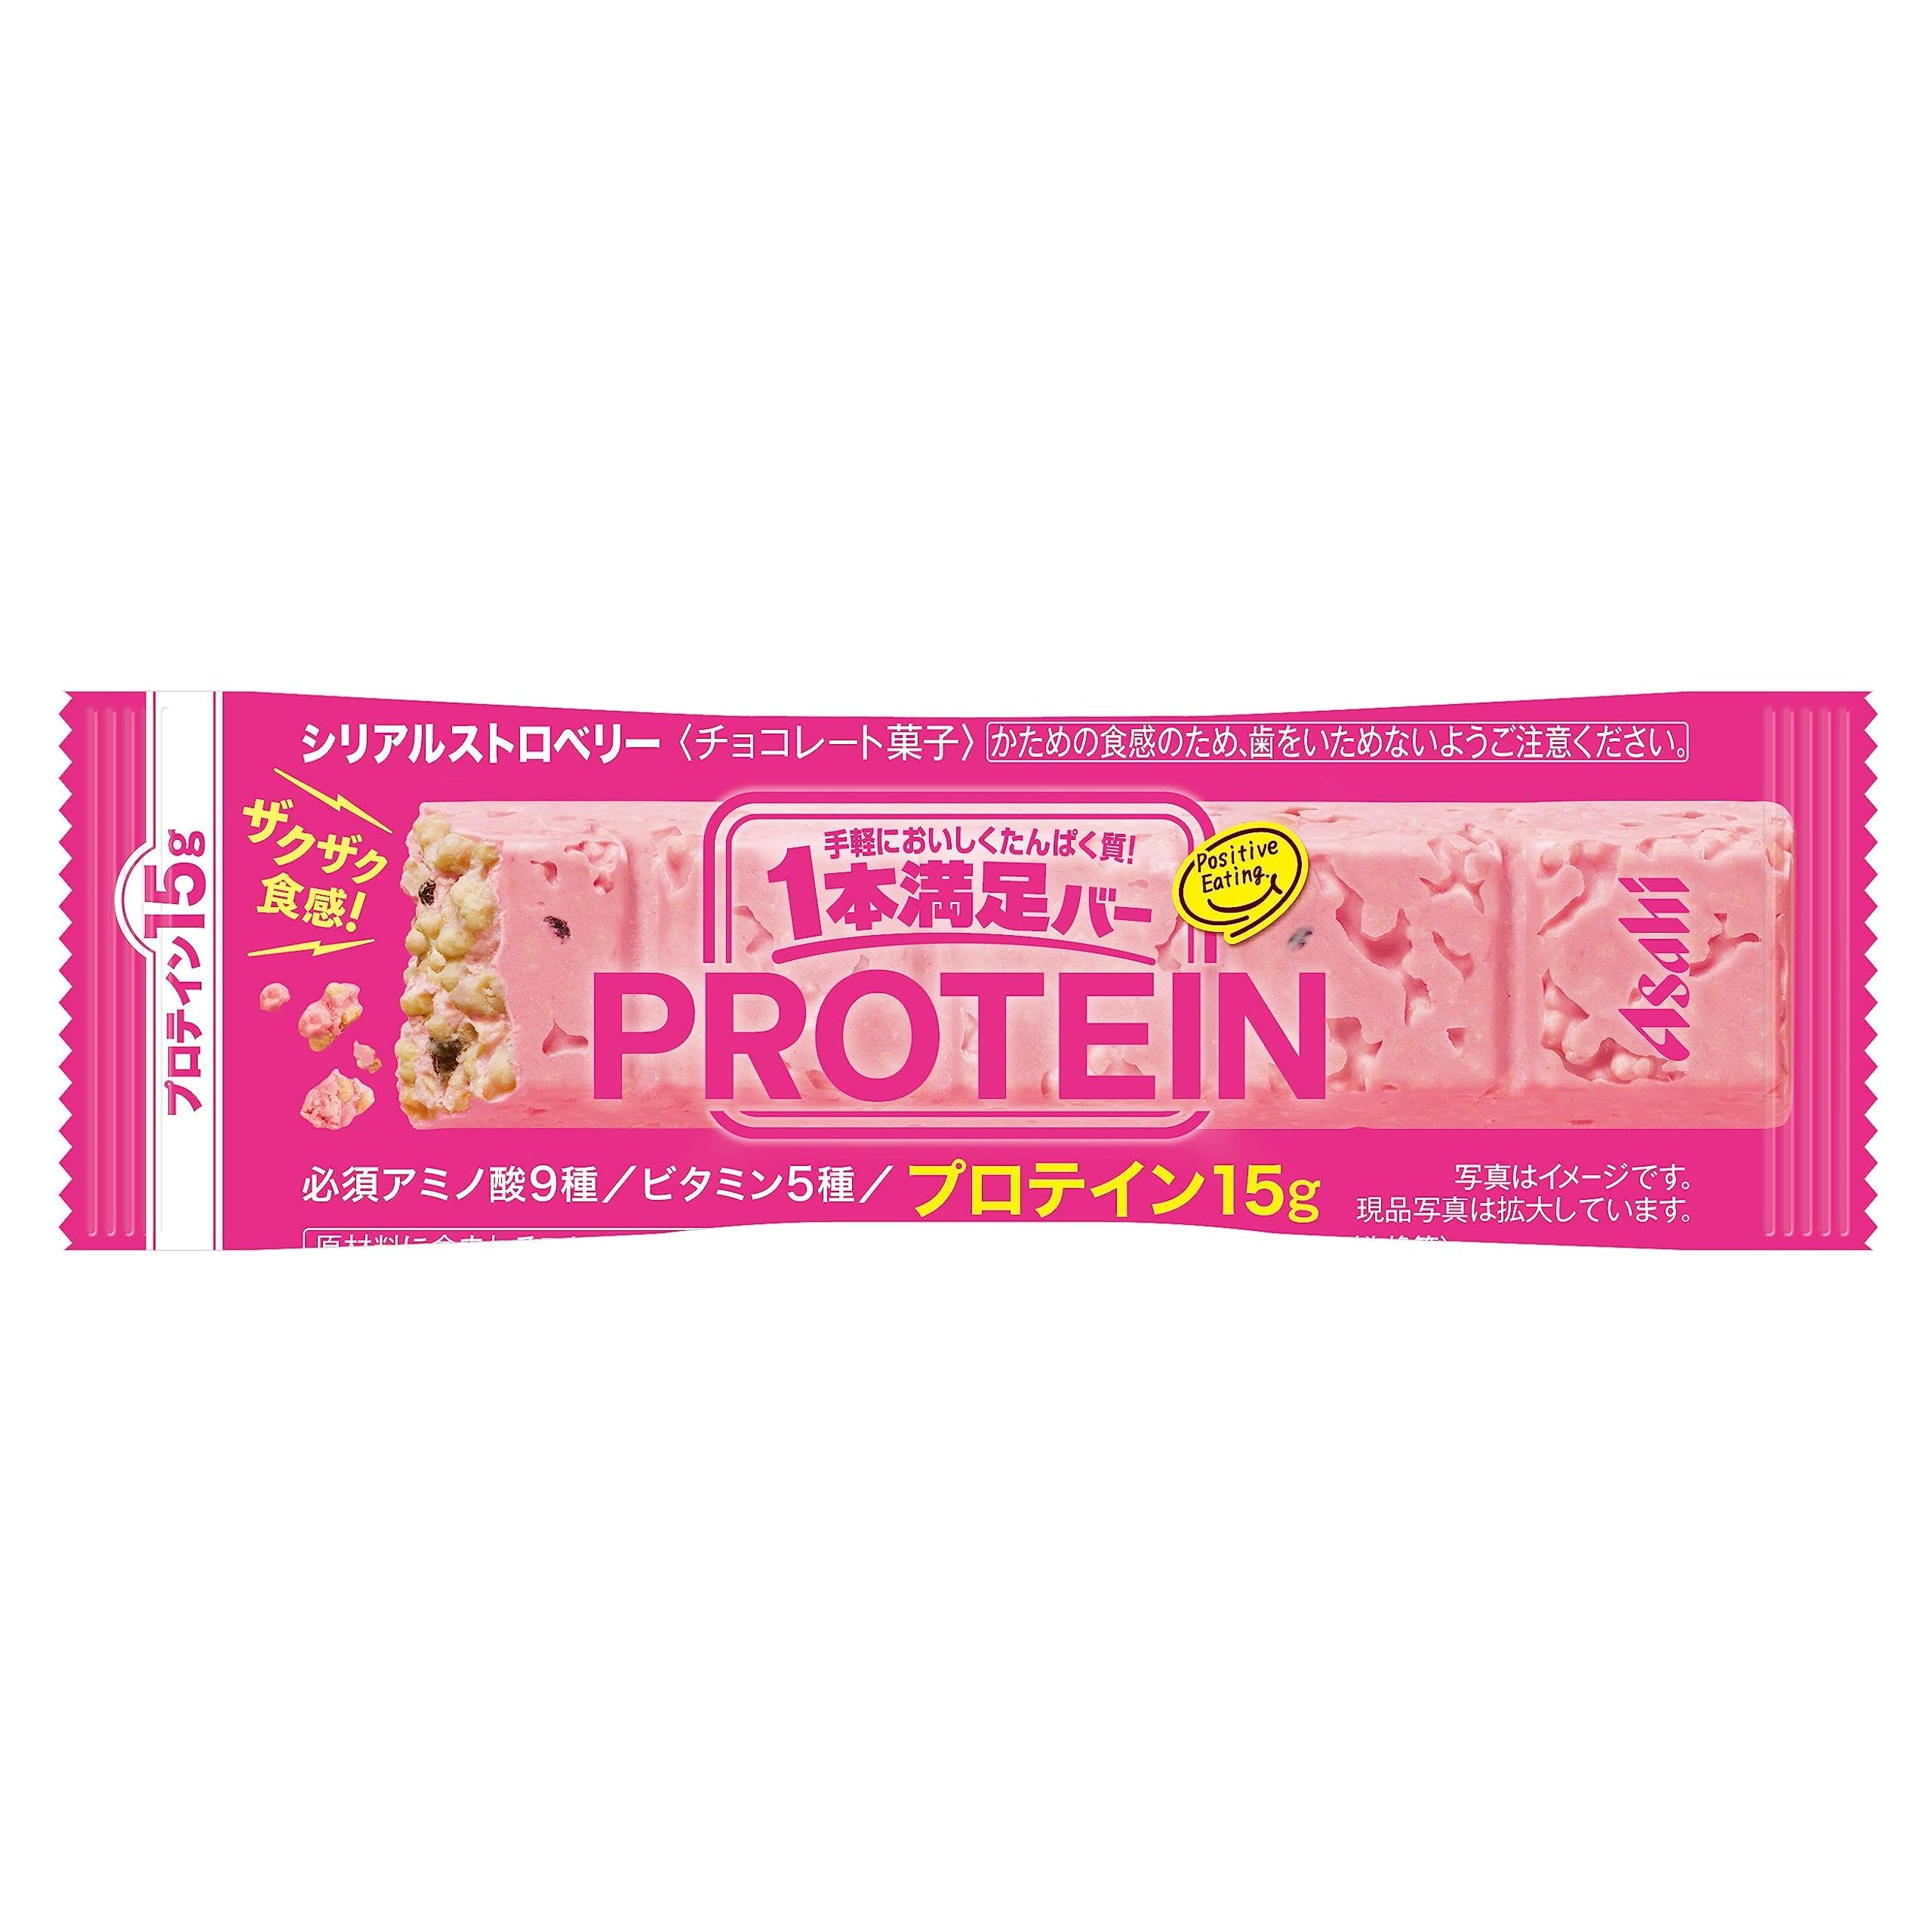 Asahi Protein Bar Strawberry Flavor Cereal Bar 15g of Protein (Pack of 9)